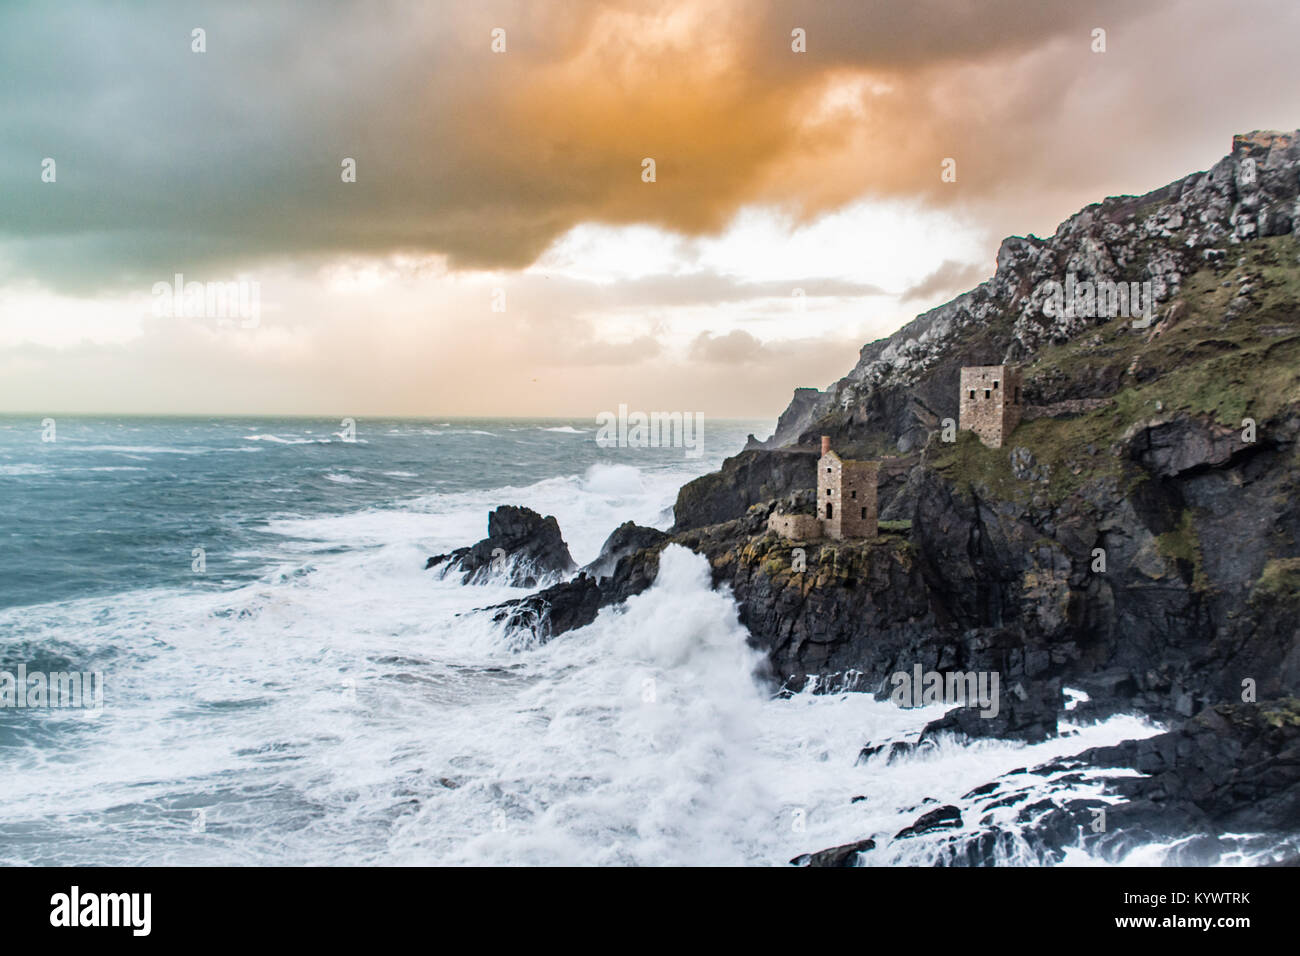 Botallack, Cornwall, UK. 17th Jan, 2018. UK Weather. Strong winds already hitting the north Cornwall coast, ahead of Storm Georgina later on today. Gusts of wind over 50mph made for a challenging picture this morning, perched on the cliffside to capture the tin mine buildings at Botallack, made famous by the recent Poldark series. Credit: Simon Maycock/Alamy Live News Stock Photo